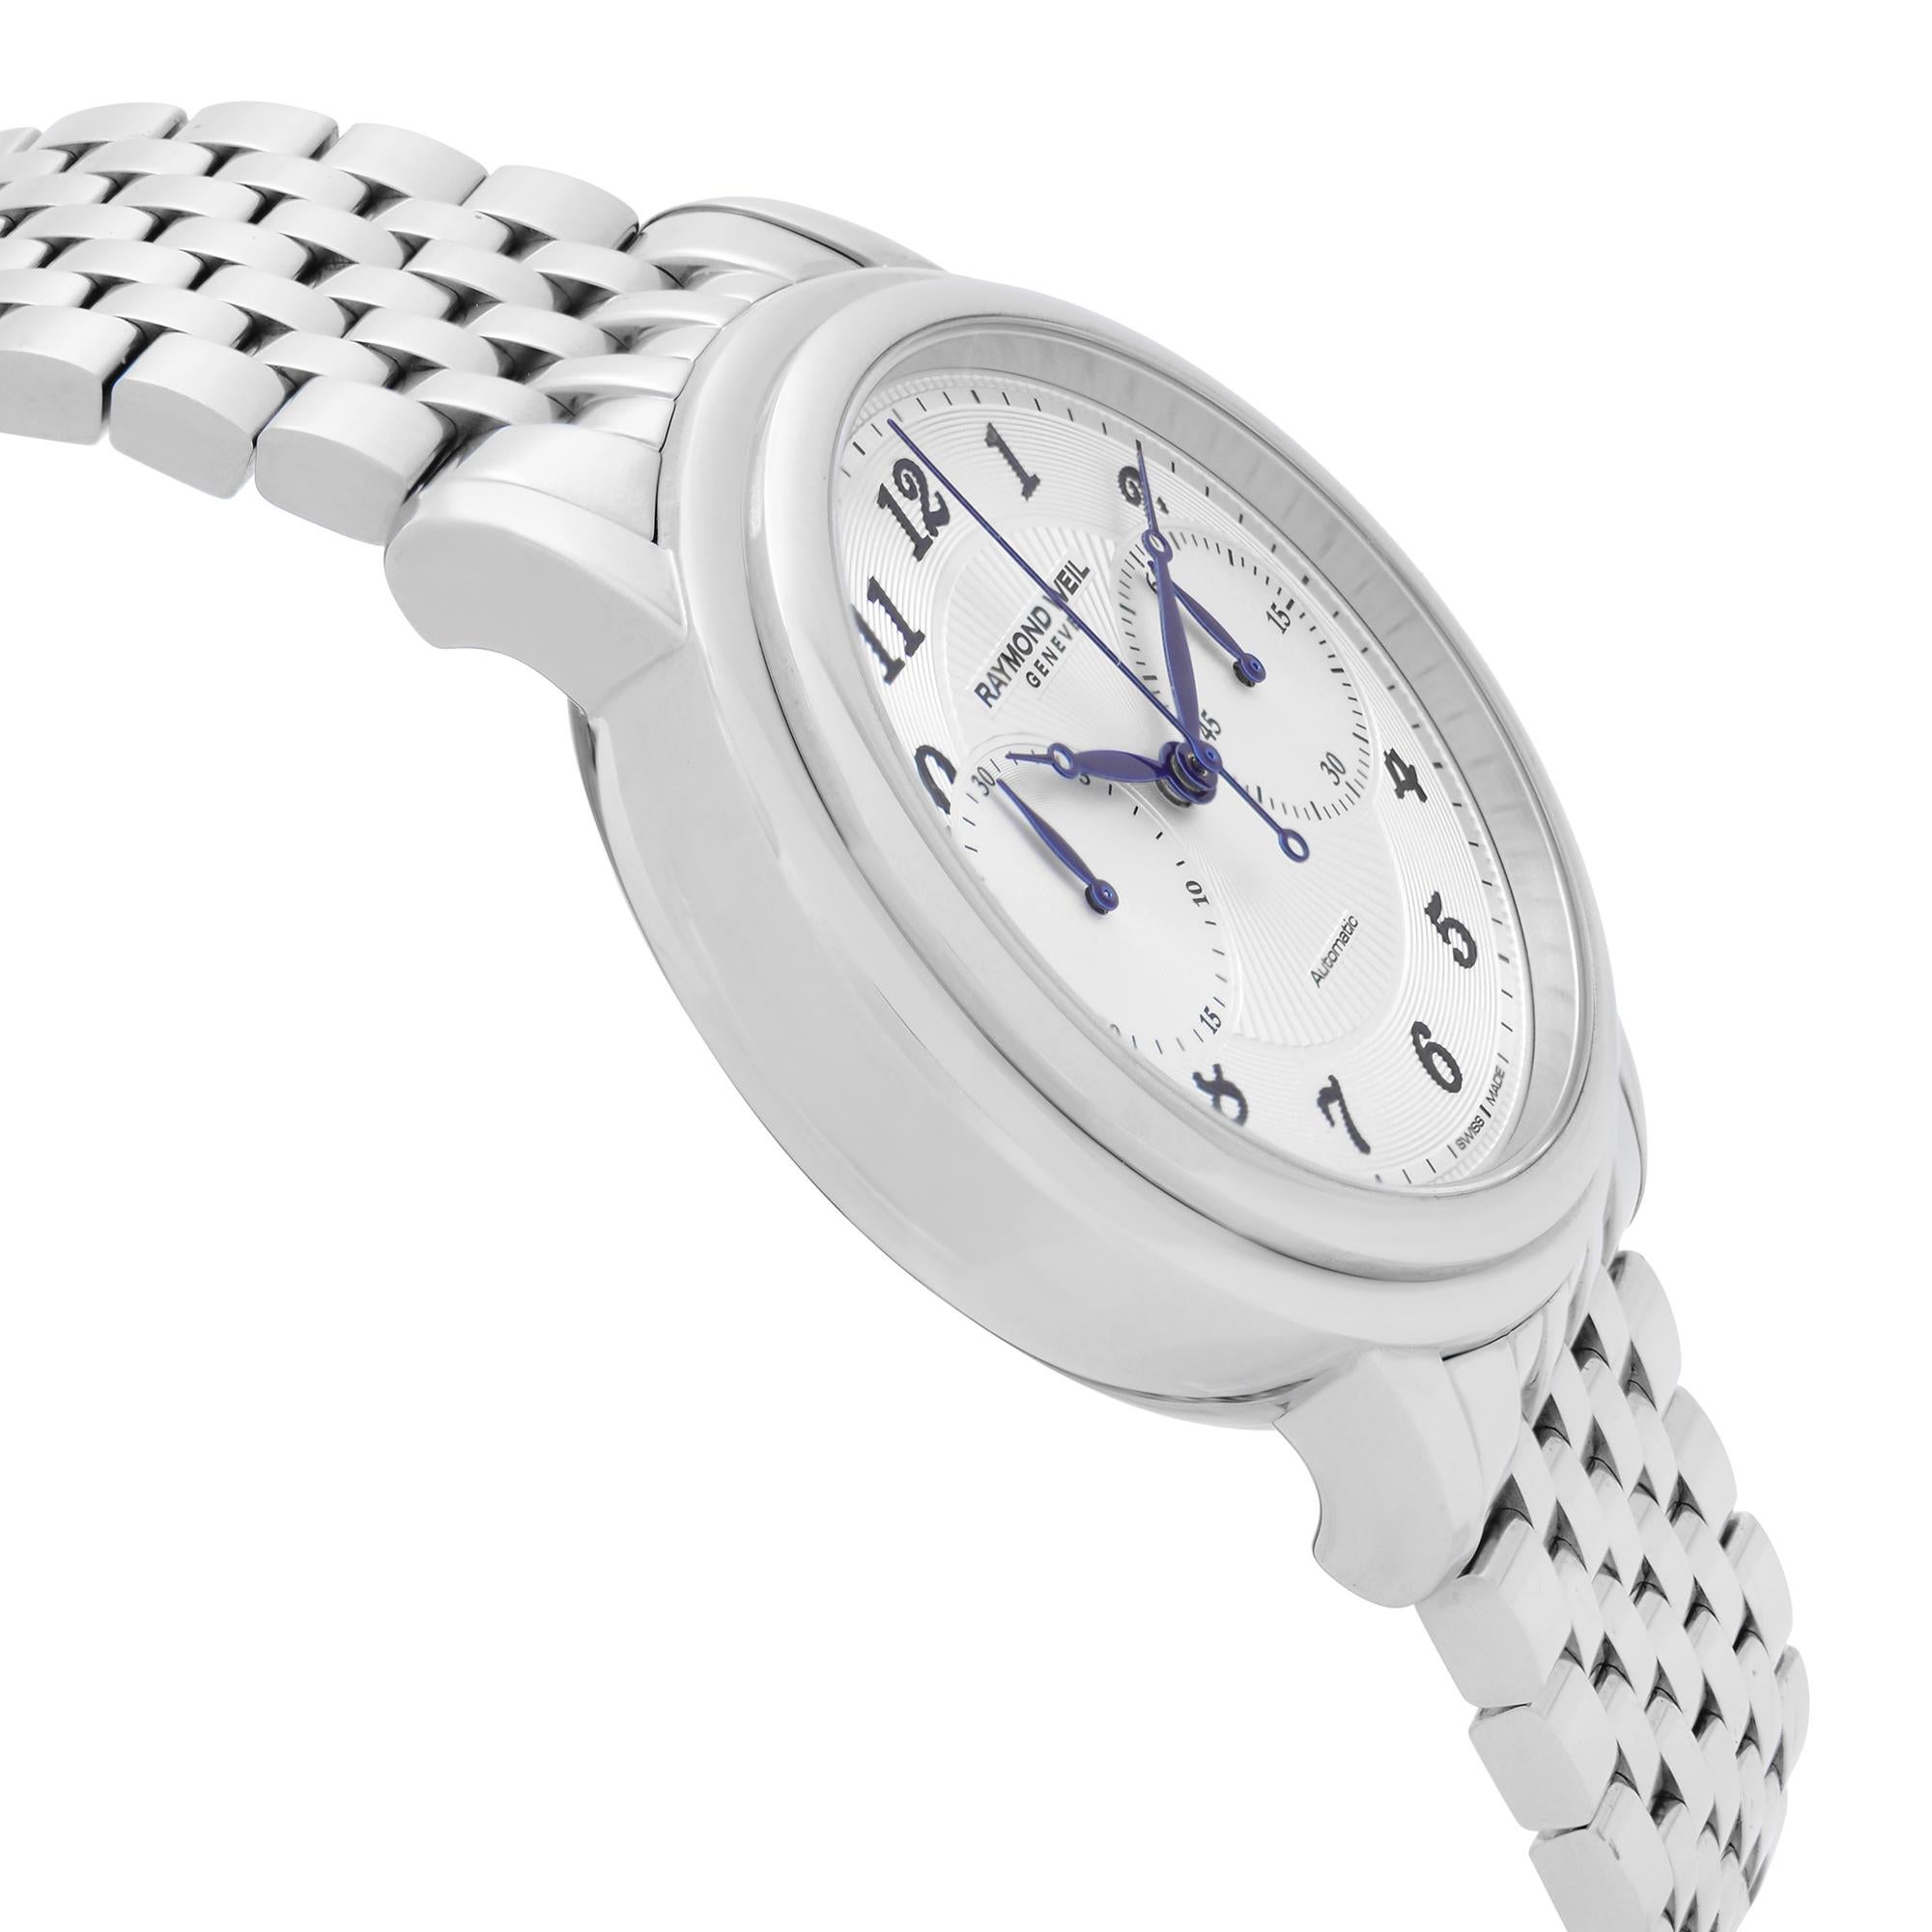 raymond stainless steel case 5atm water resistant